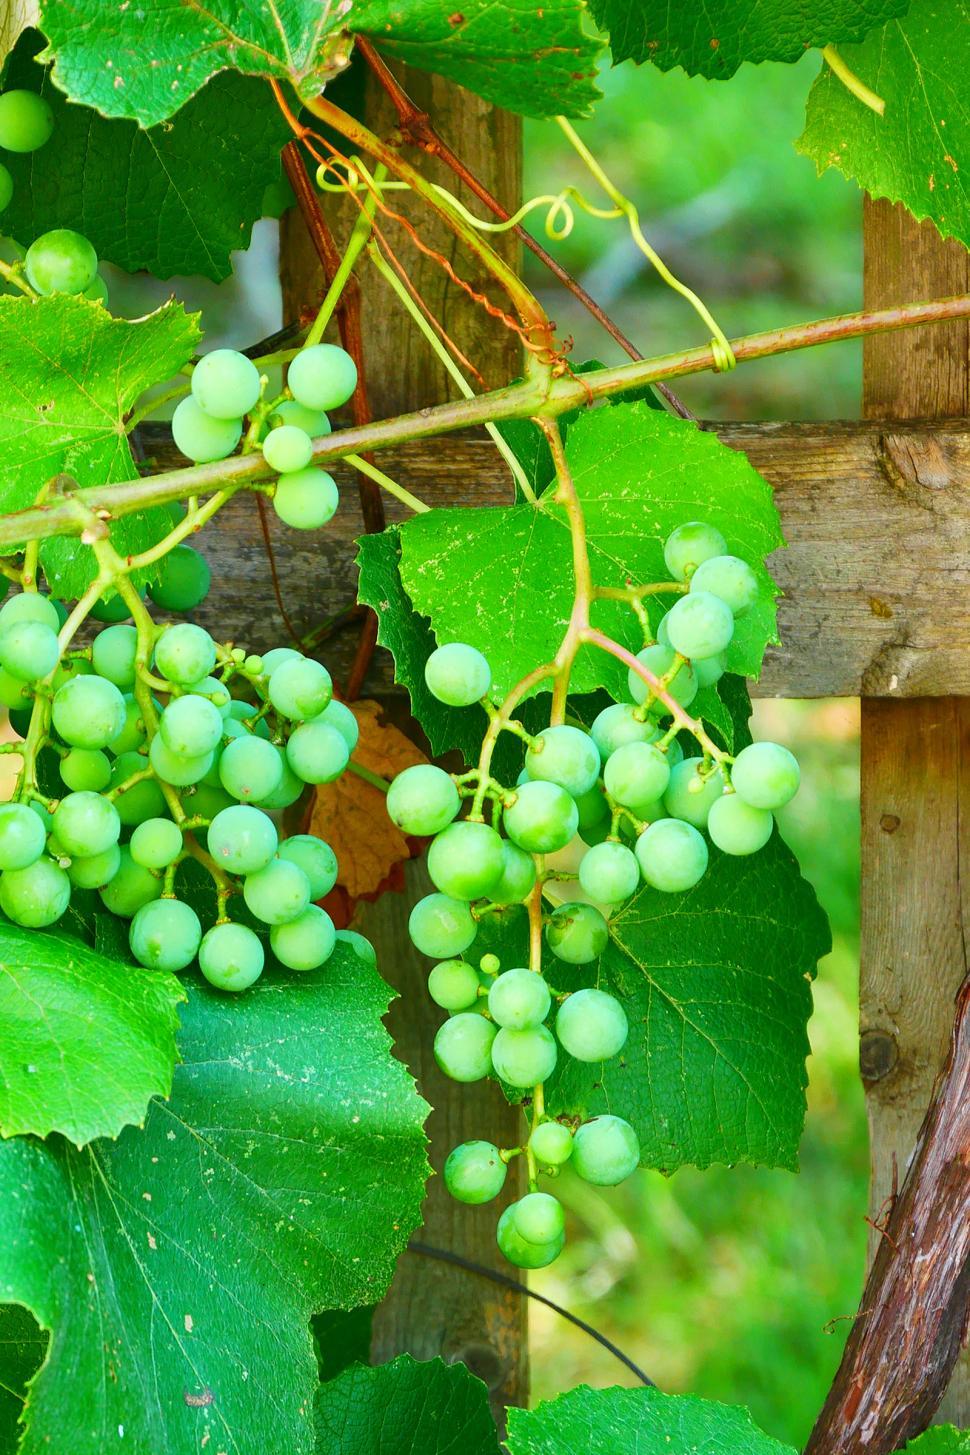 Free Image of Bunch Of Grapes on Wooden Trellis 